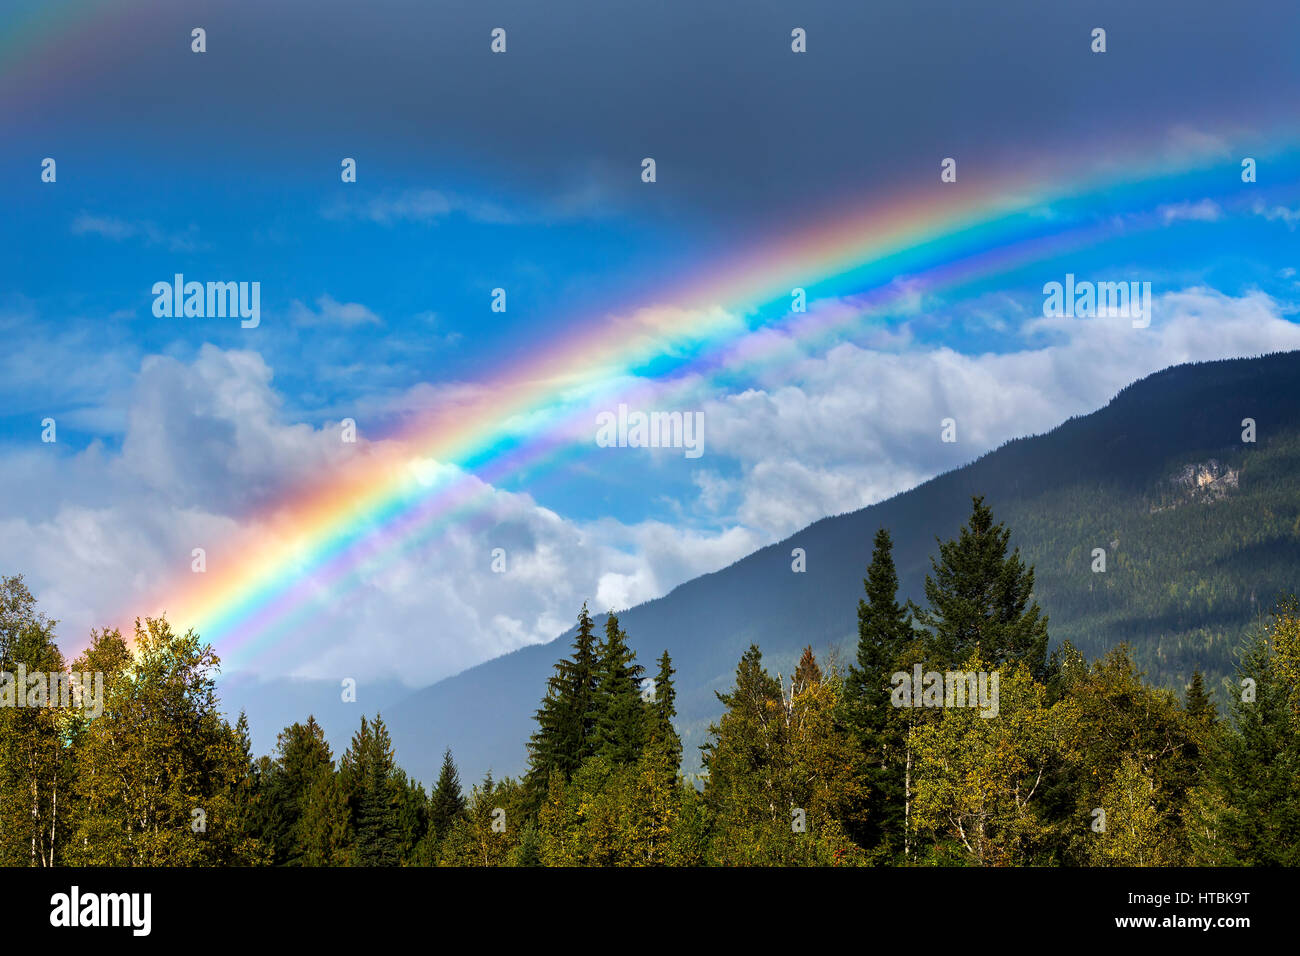 Colourful rainbow across the sky with mountain side, storm clouds and blue sky in the background; Revelstoke, British Columbia, Canada Stock Photo